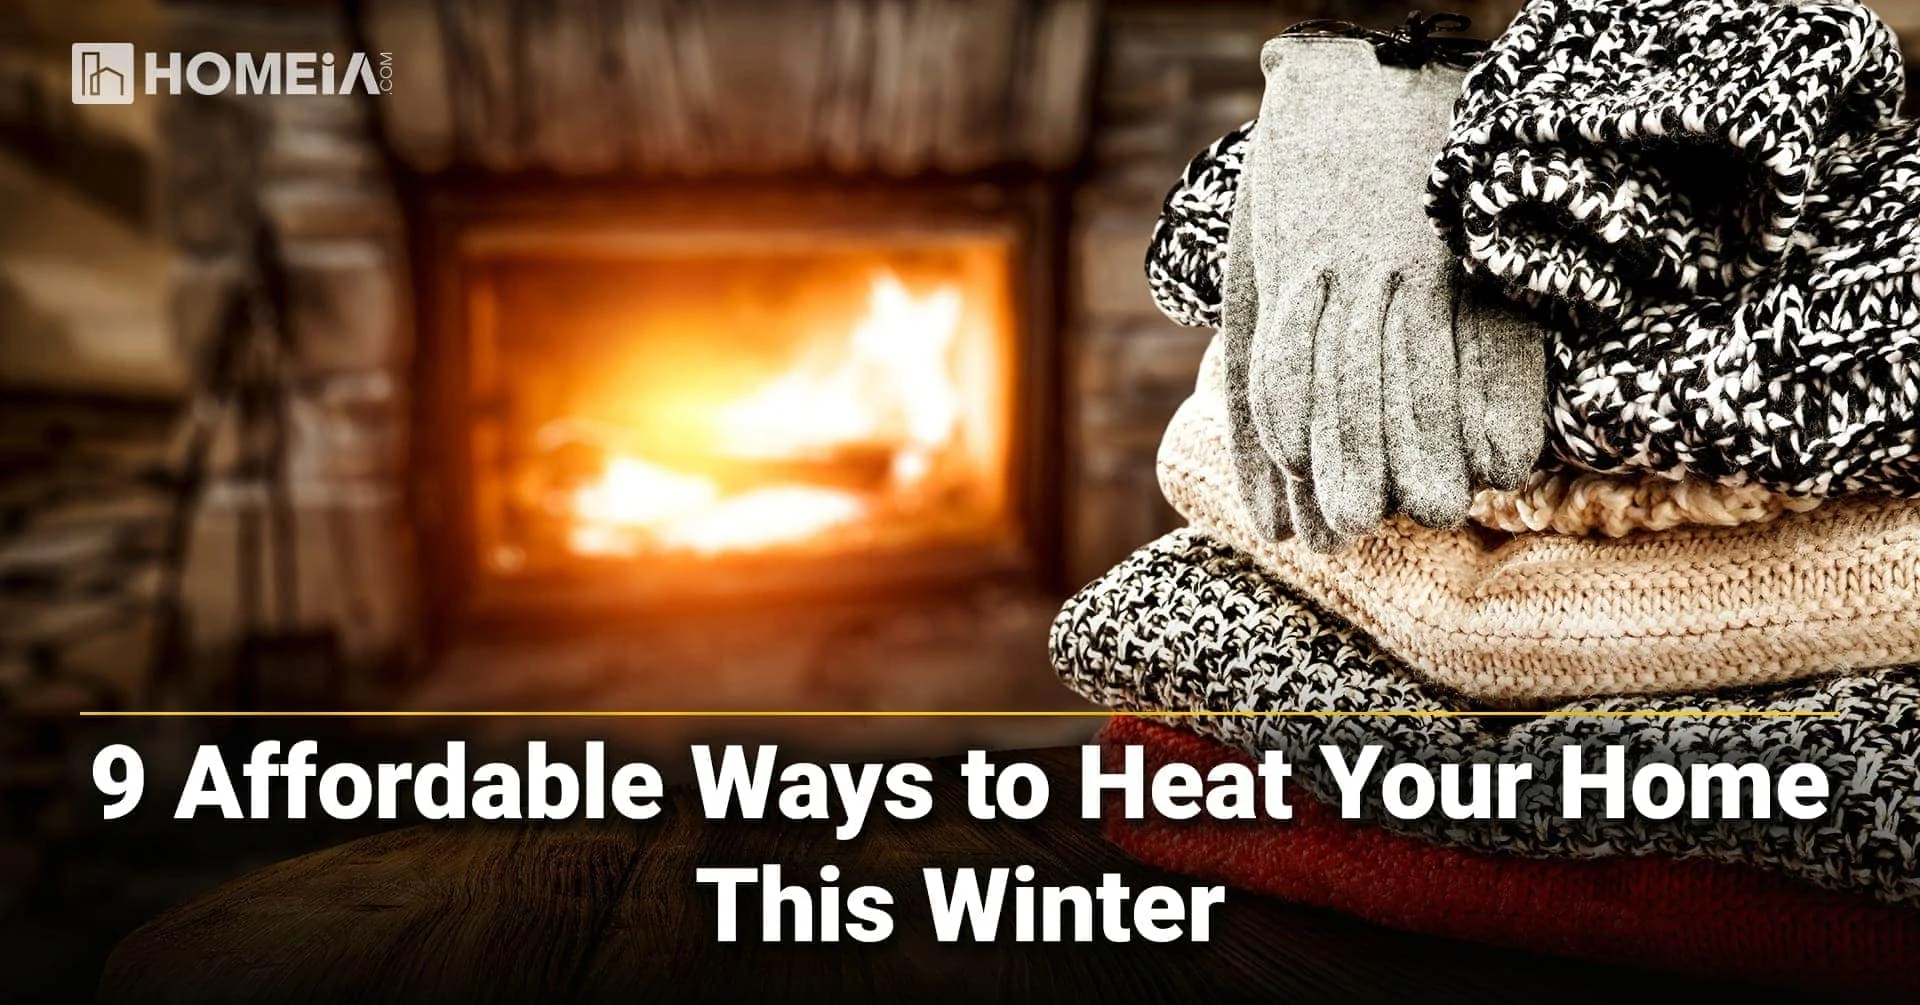 9 Affordable Ways to Heat Your Home This Winter